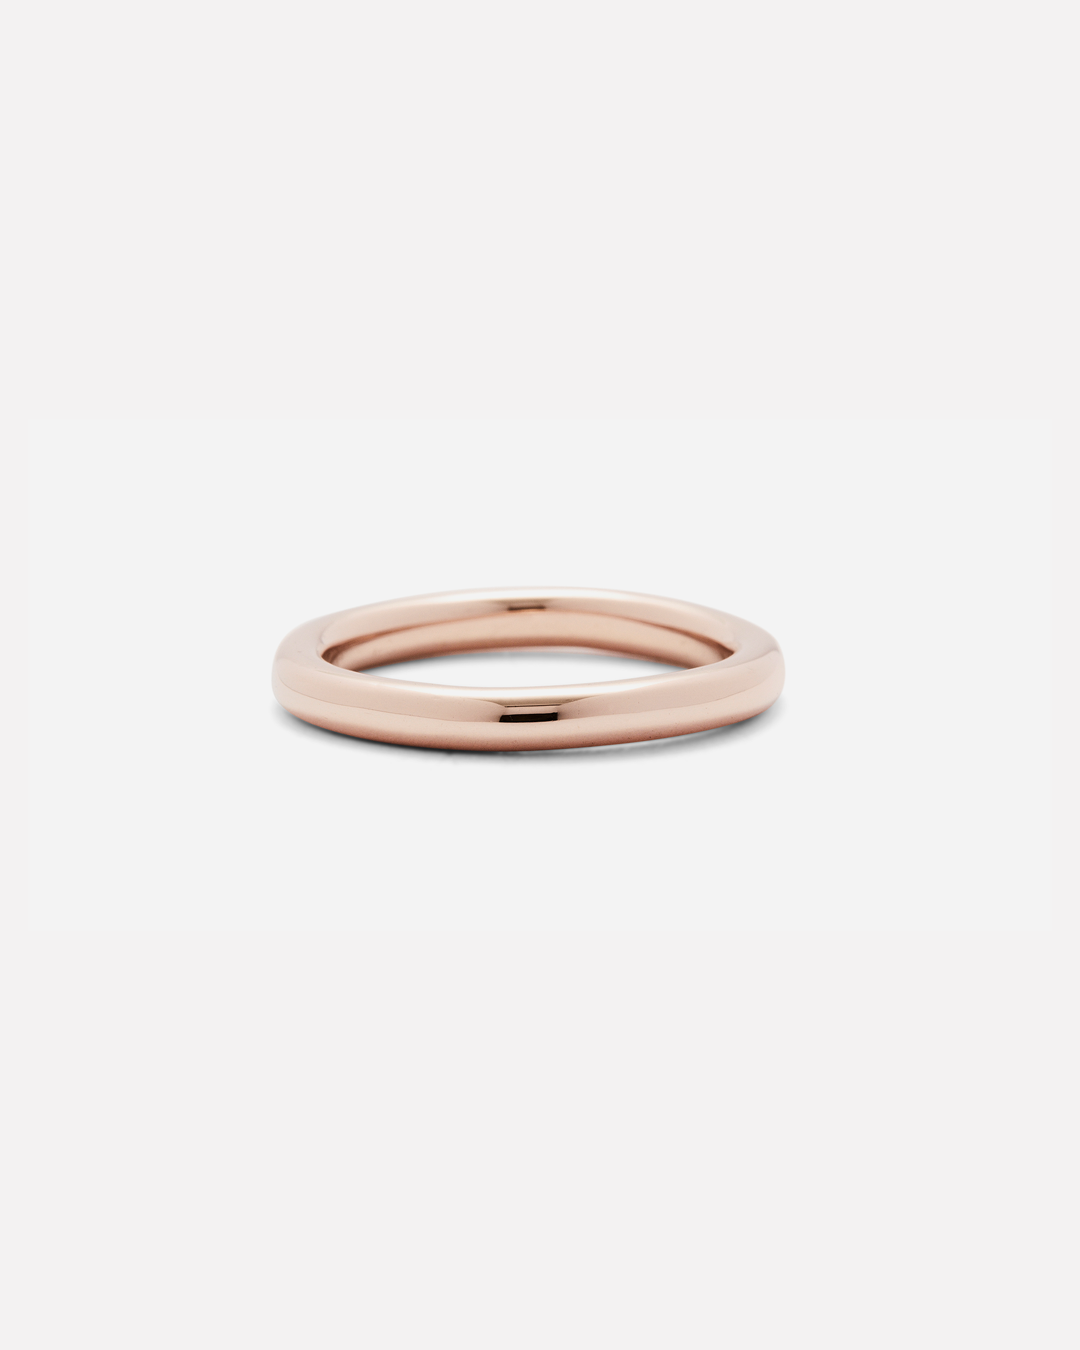 Round Band By fitzgerald jewelry in Wedding Bands Category